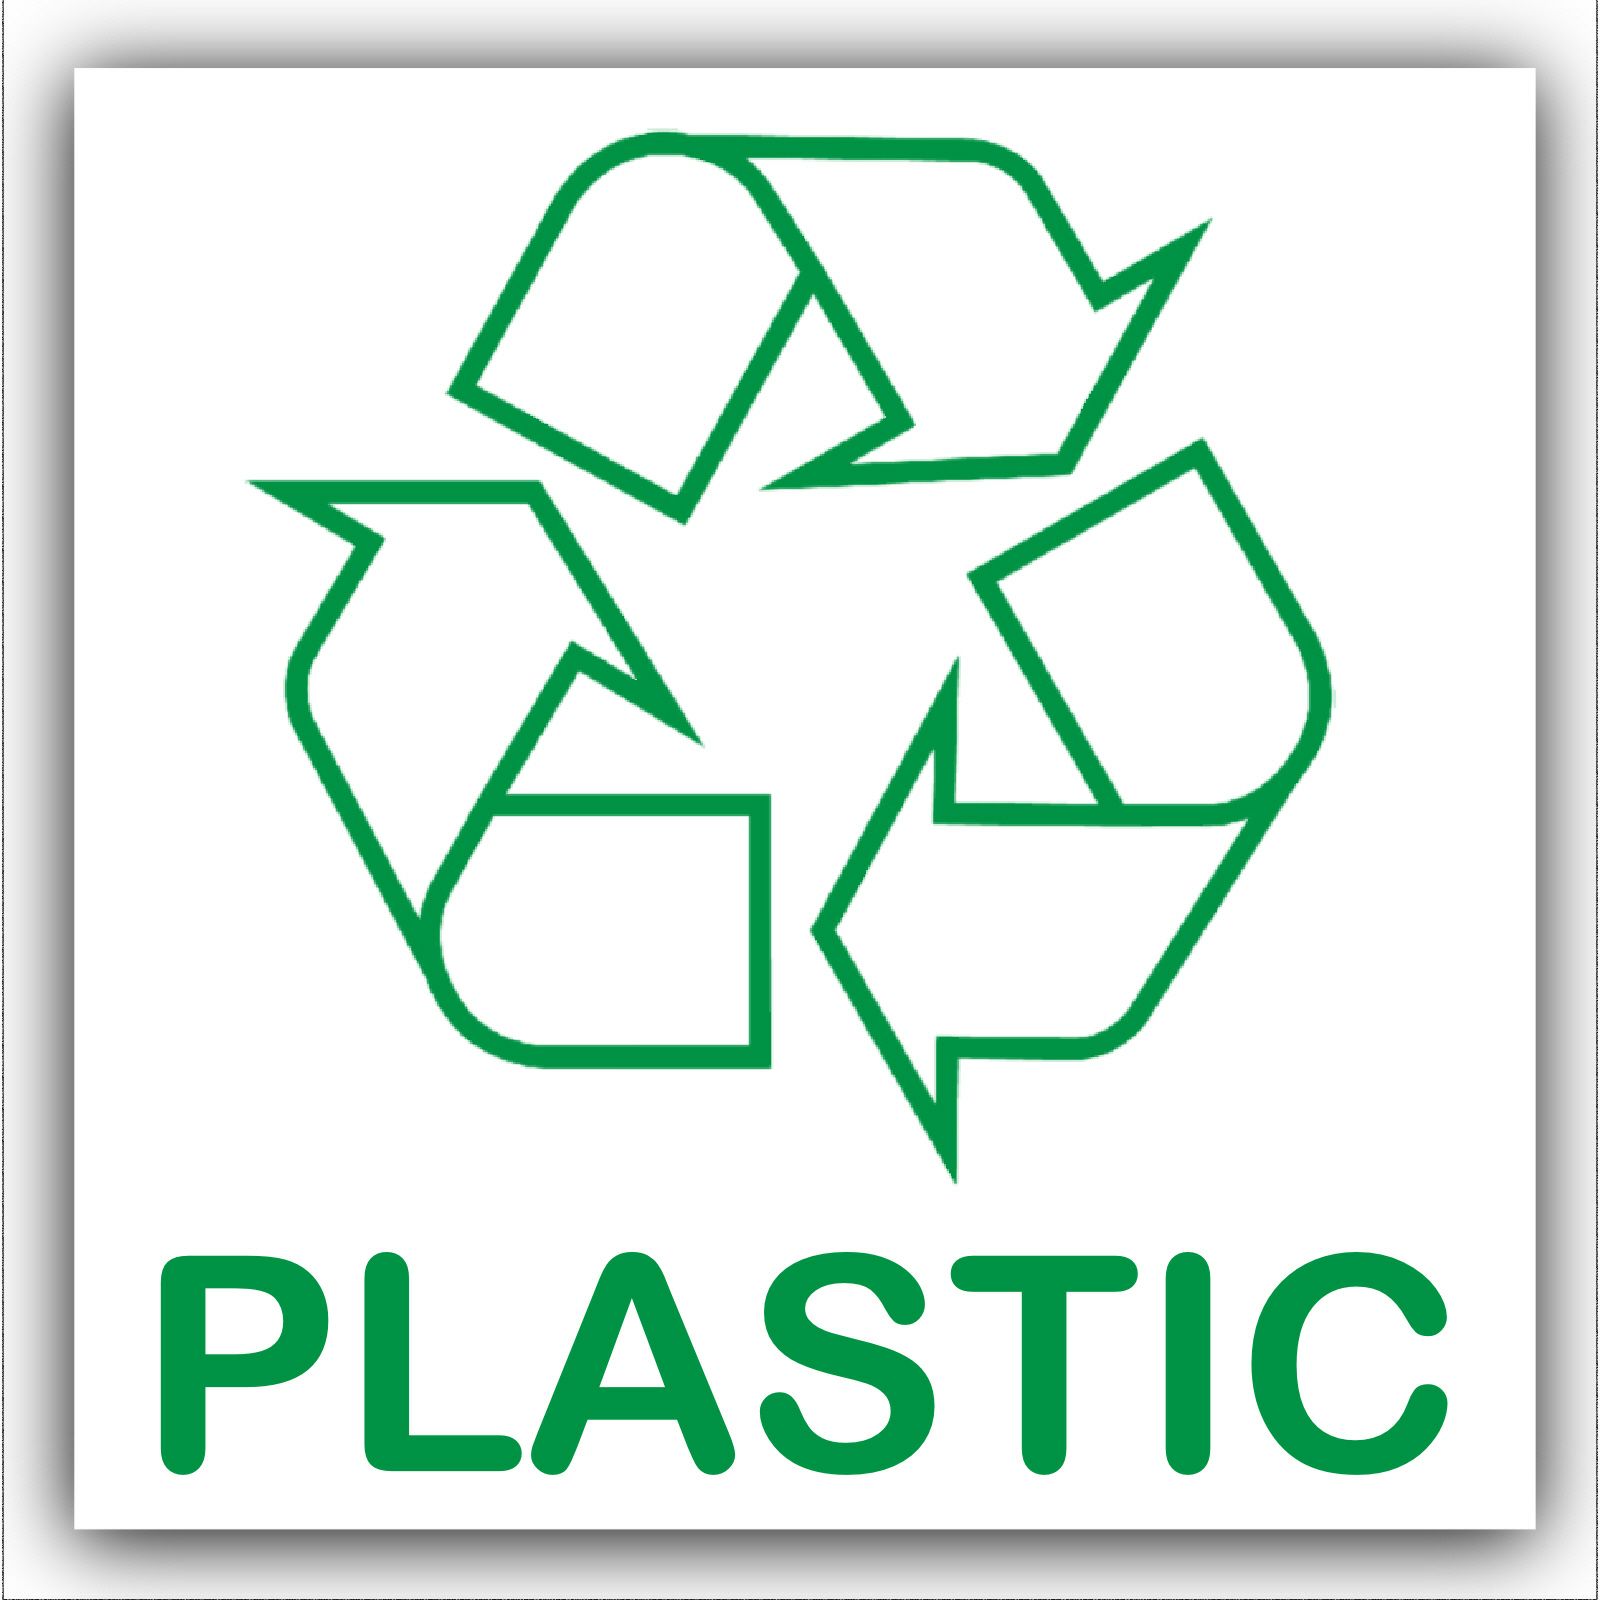 1 x Plastic Recycling Bin Adhesive Sticker-Recycle Logo Sign ...